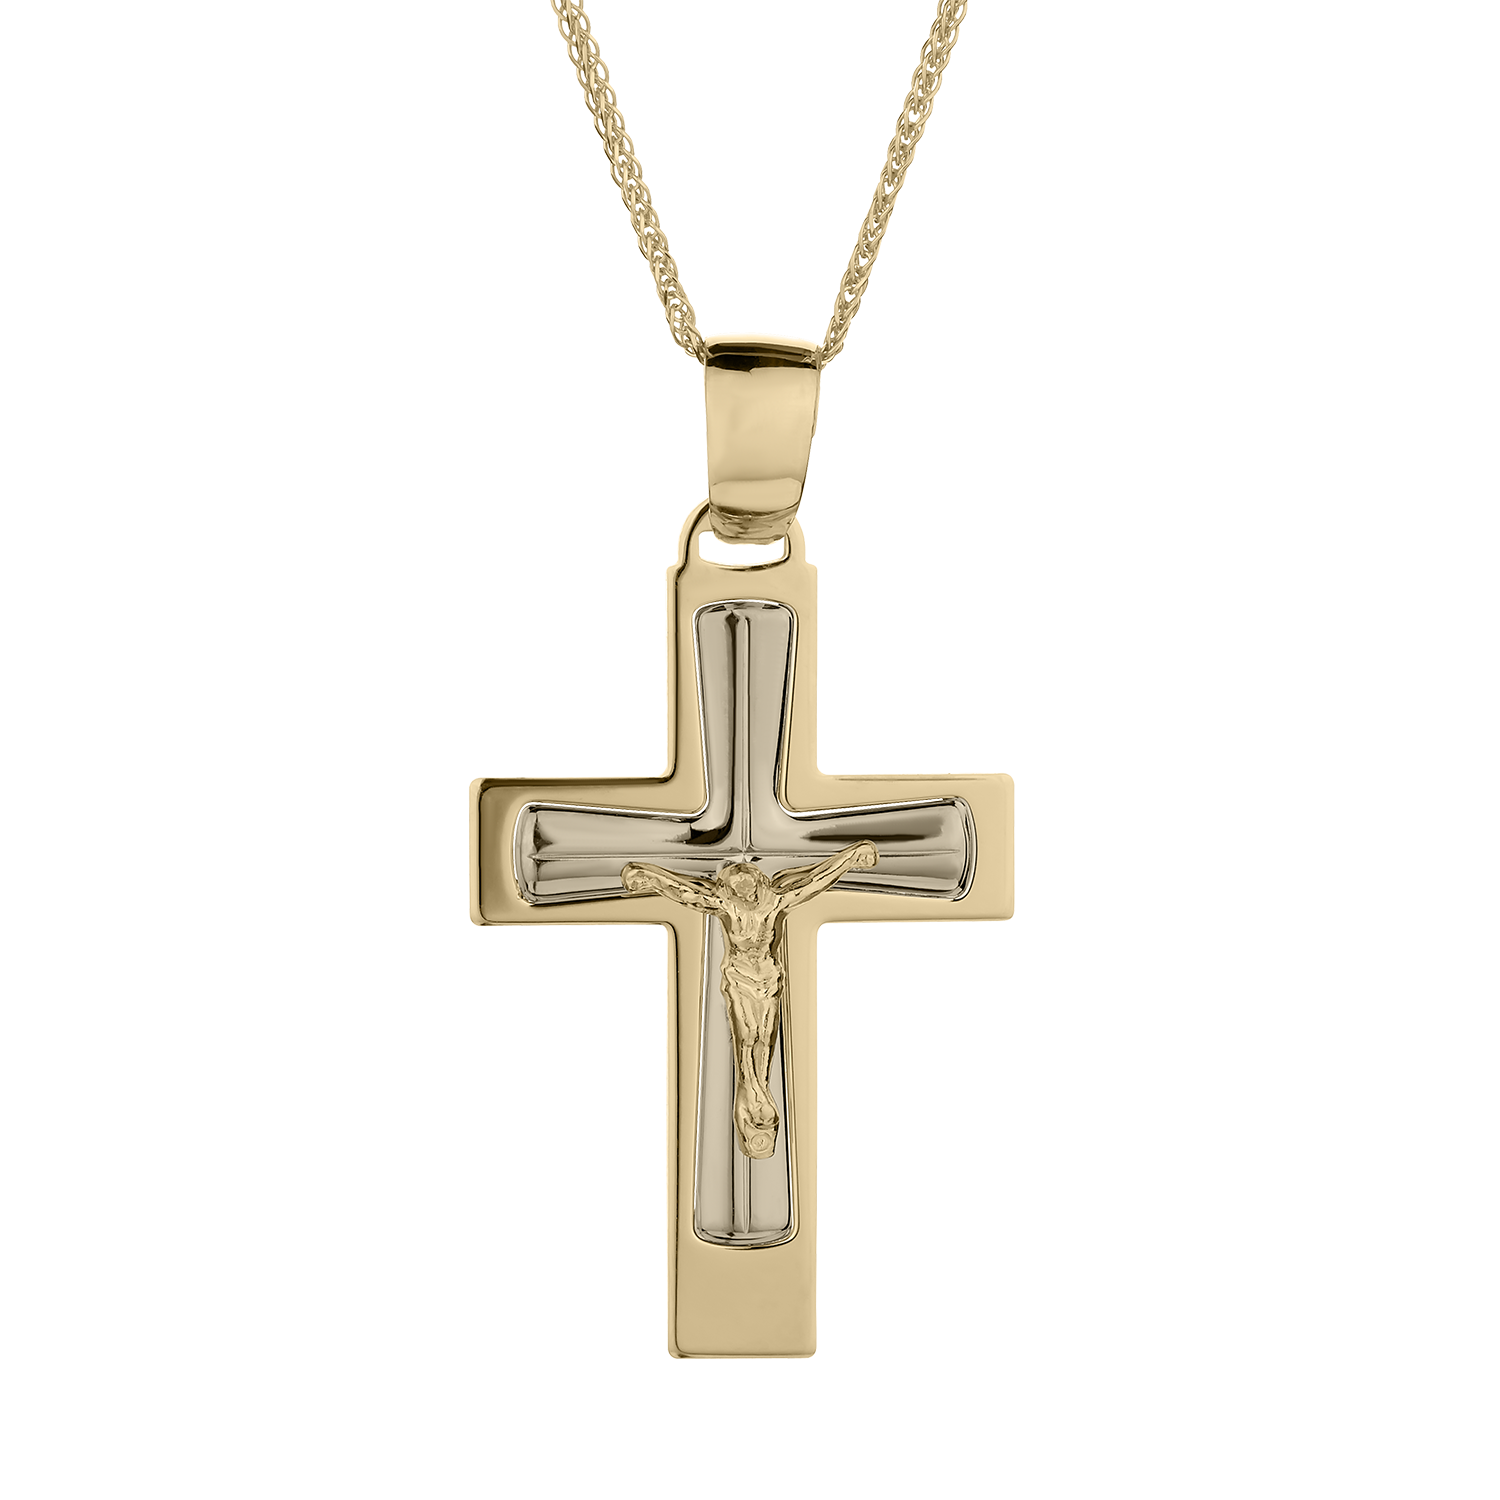 Fancy Italian Crucifix Cross, 10kt Yellow and White Gold (Two Tone) .....................Now